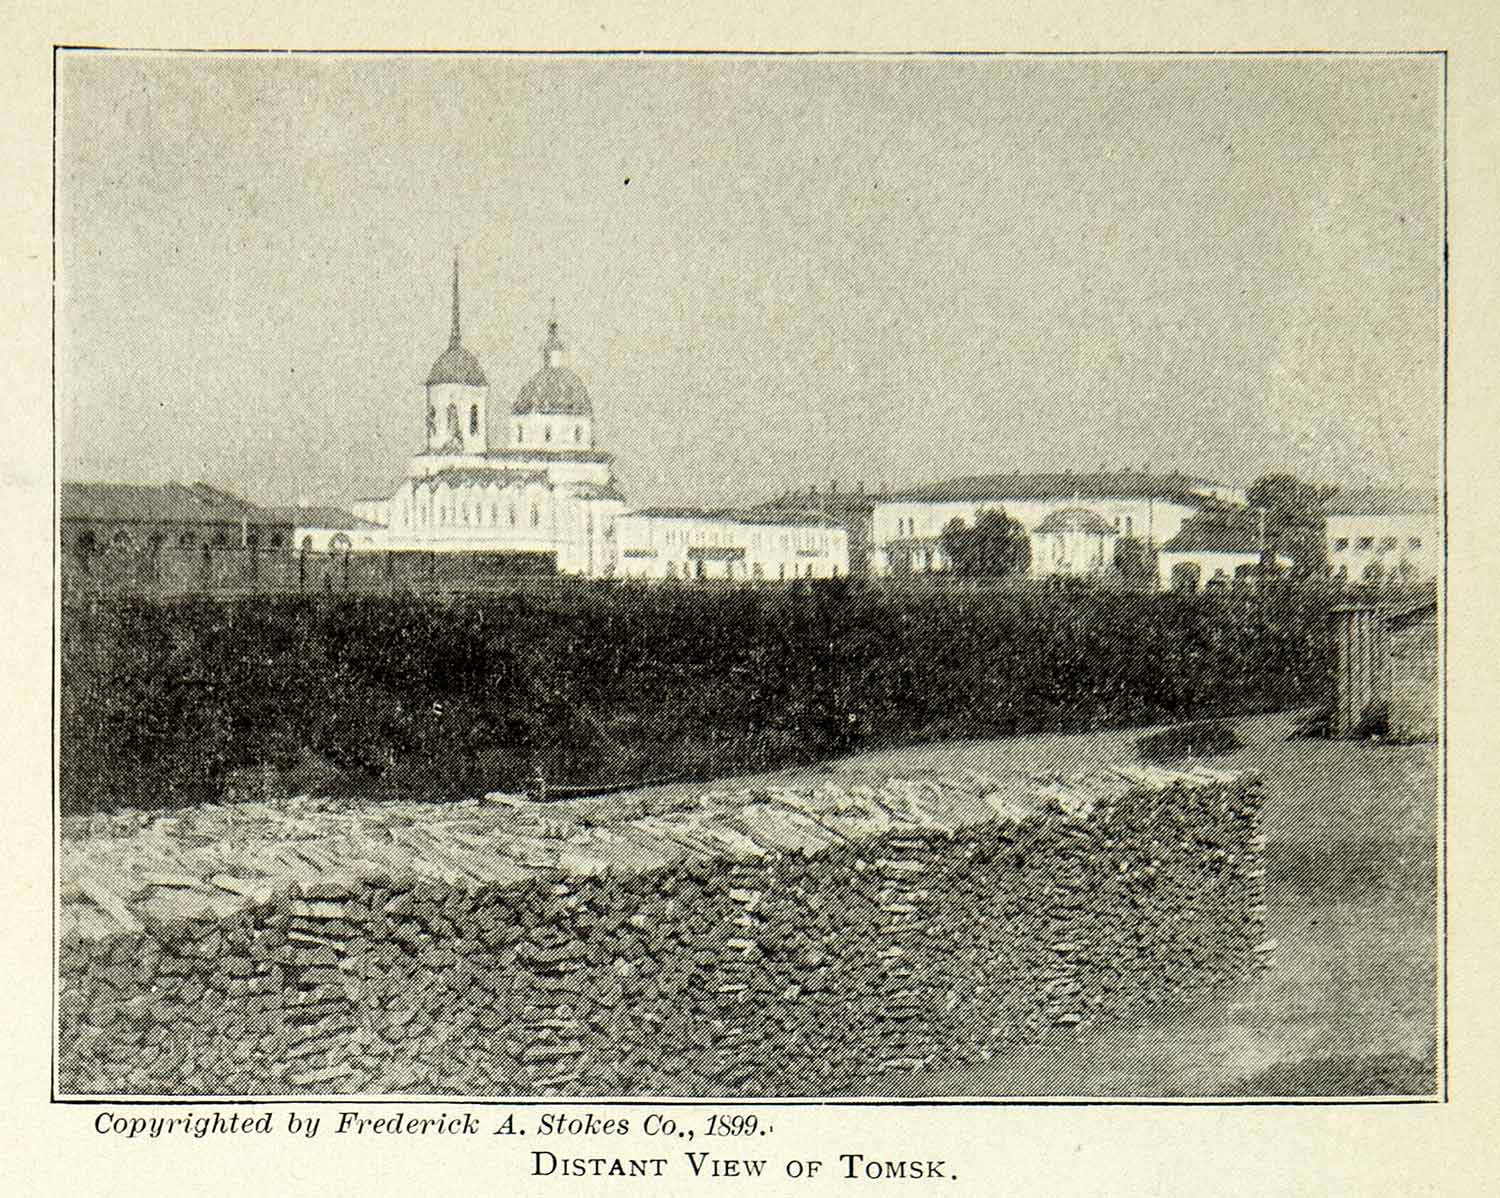 1900 Print Tomsk Russian City Siberia Architecture View Historical Image BVM1